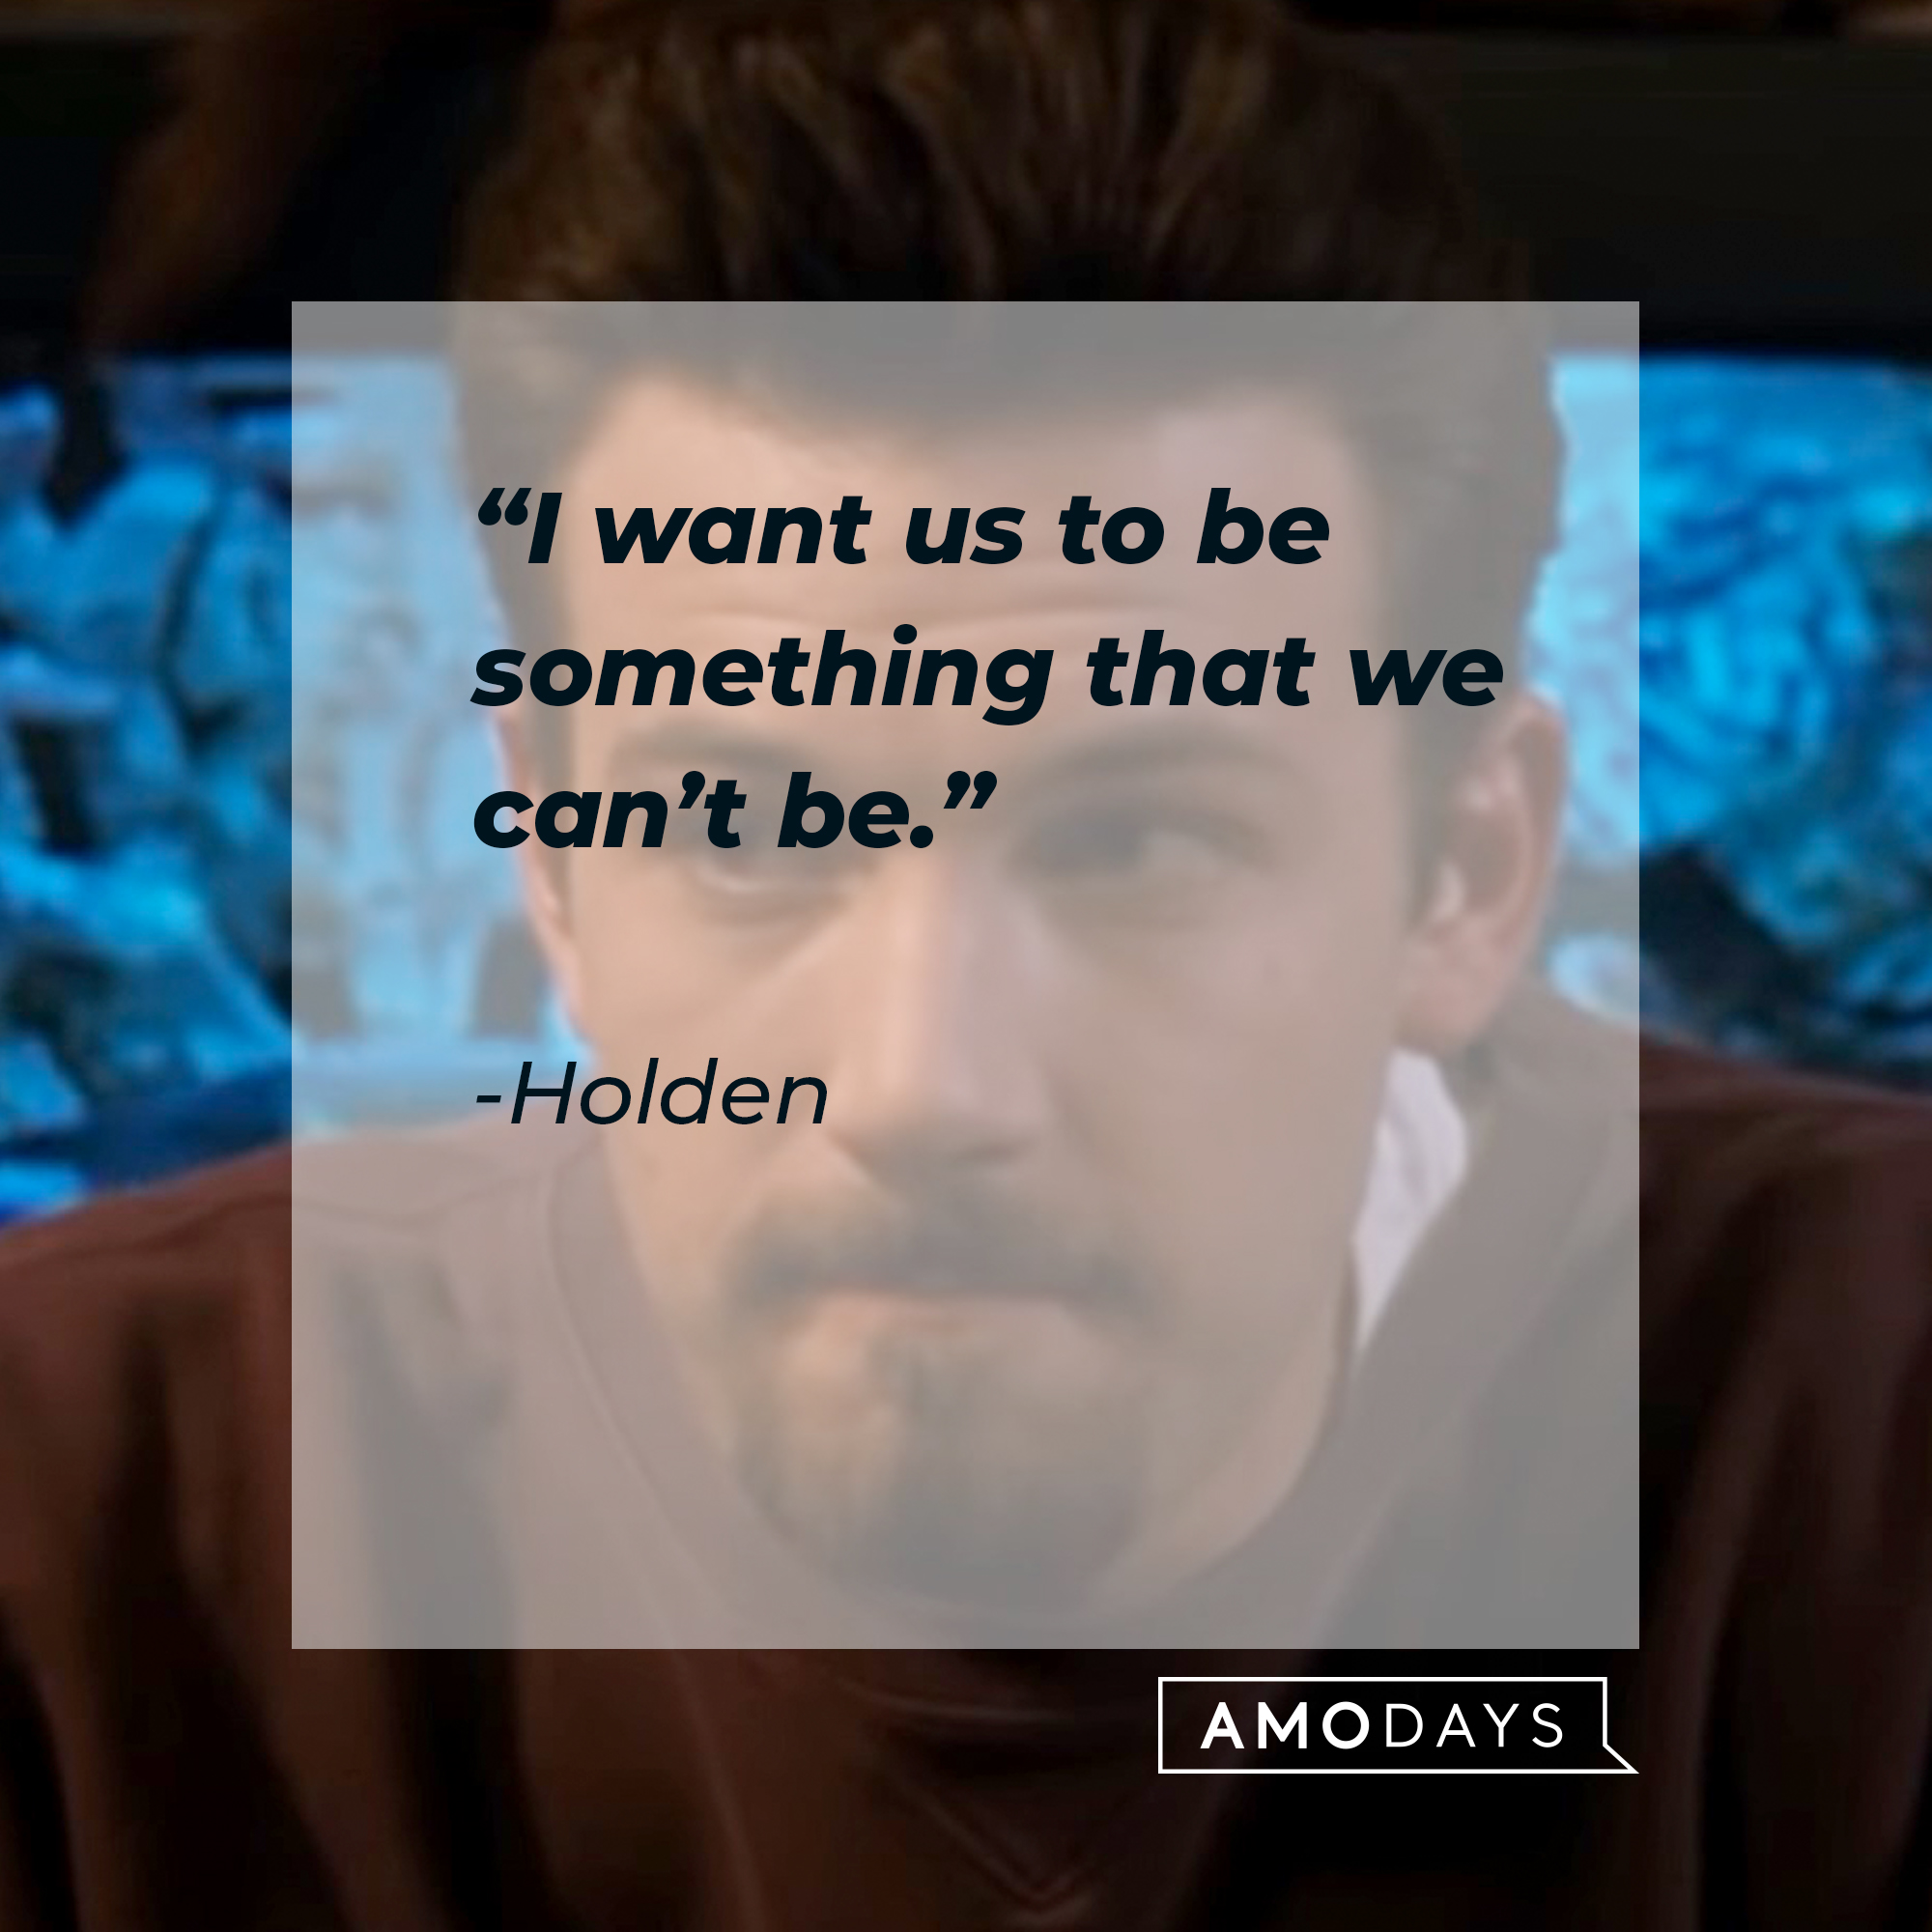 Holden, with his quote: “I want us to be something that we can’t be.” | Source: facebook.com/ChasingAmyMovie